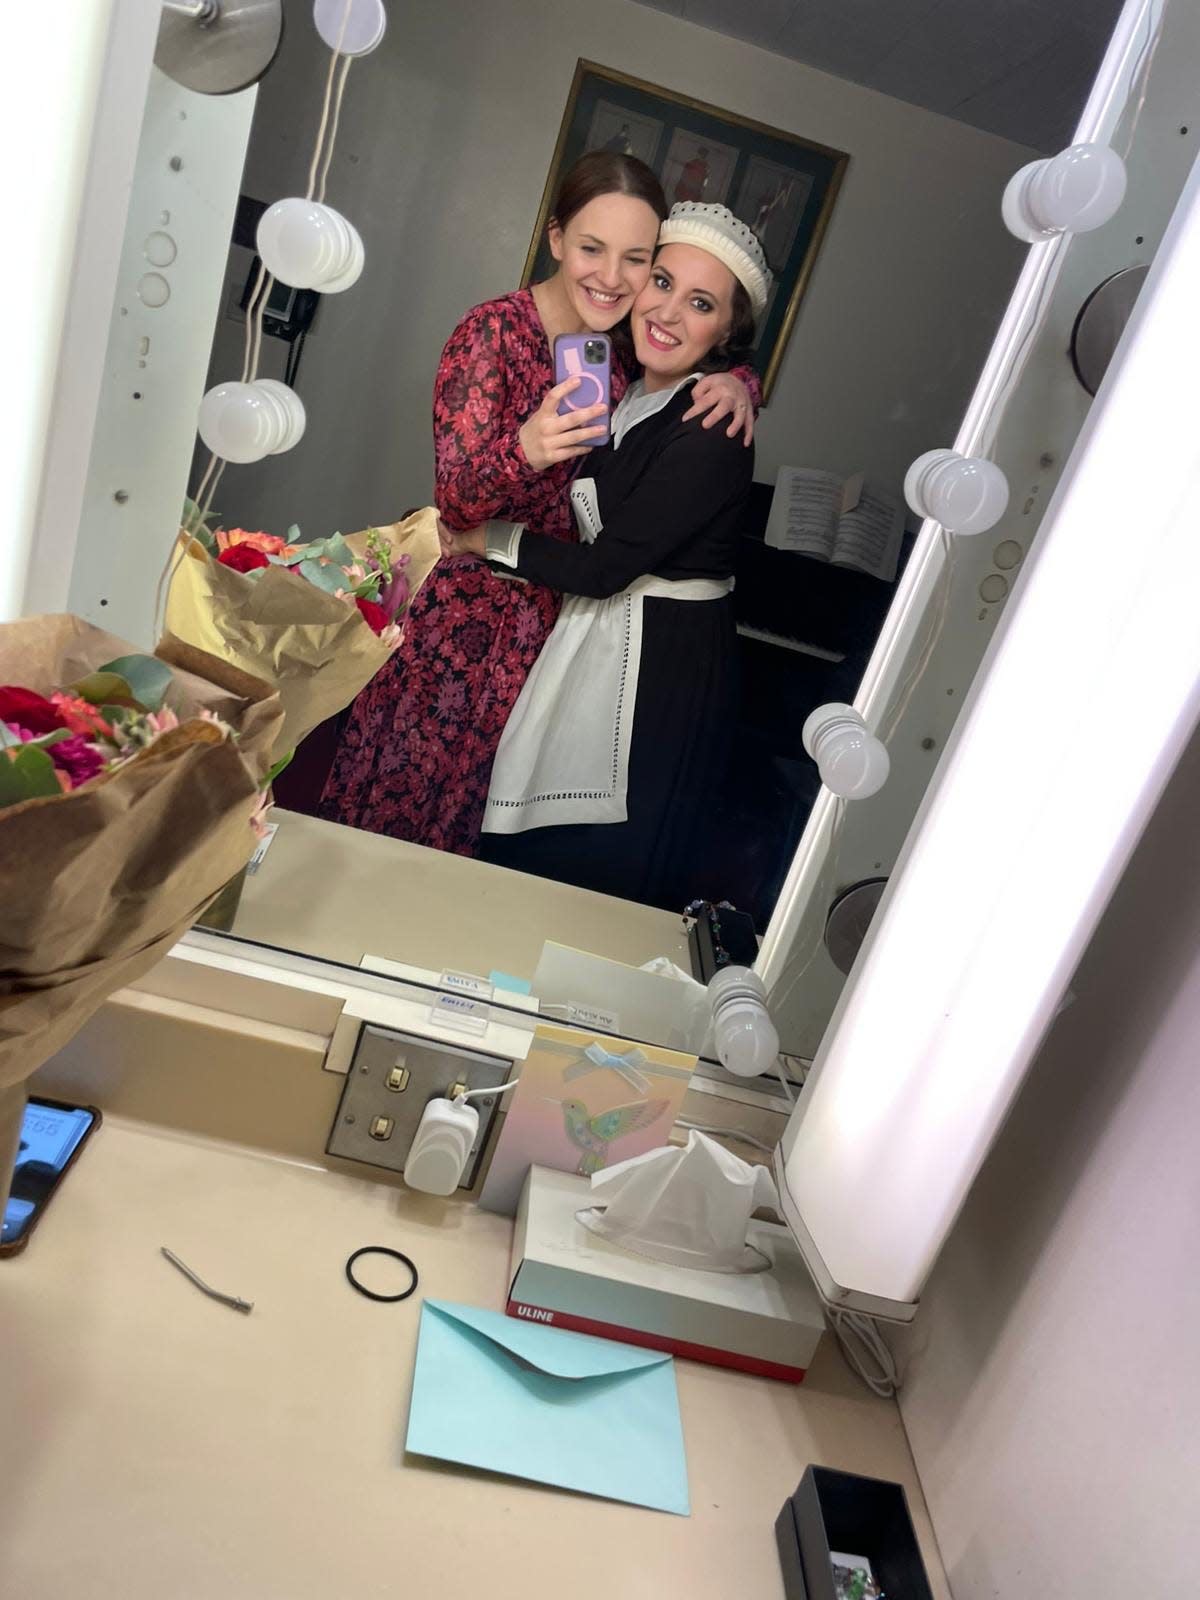 Sisters Alison and Emily Pogorelc of Whitefish Bay pose backstate the at Metropolitan Opera in New York, where they worked together on a recent production.